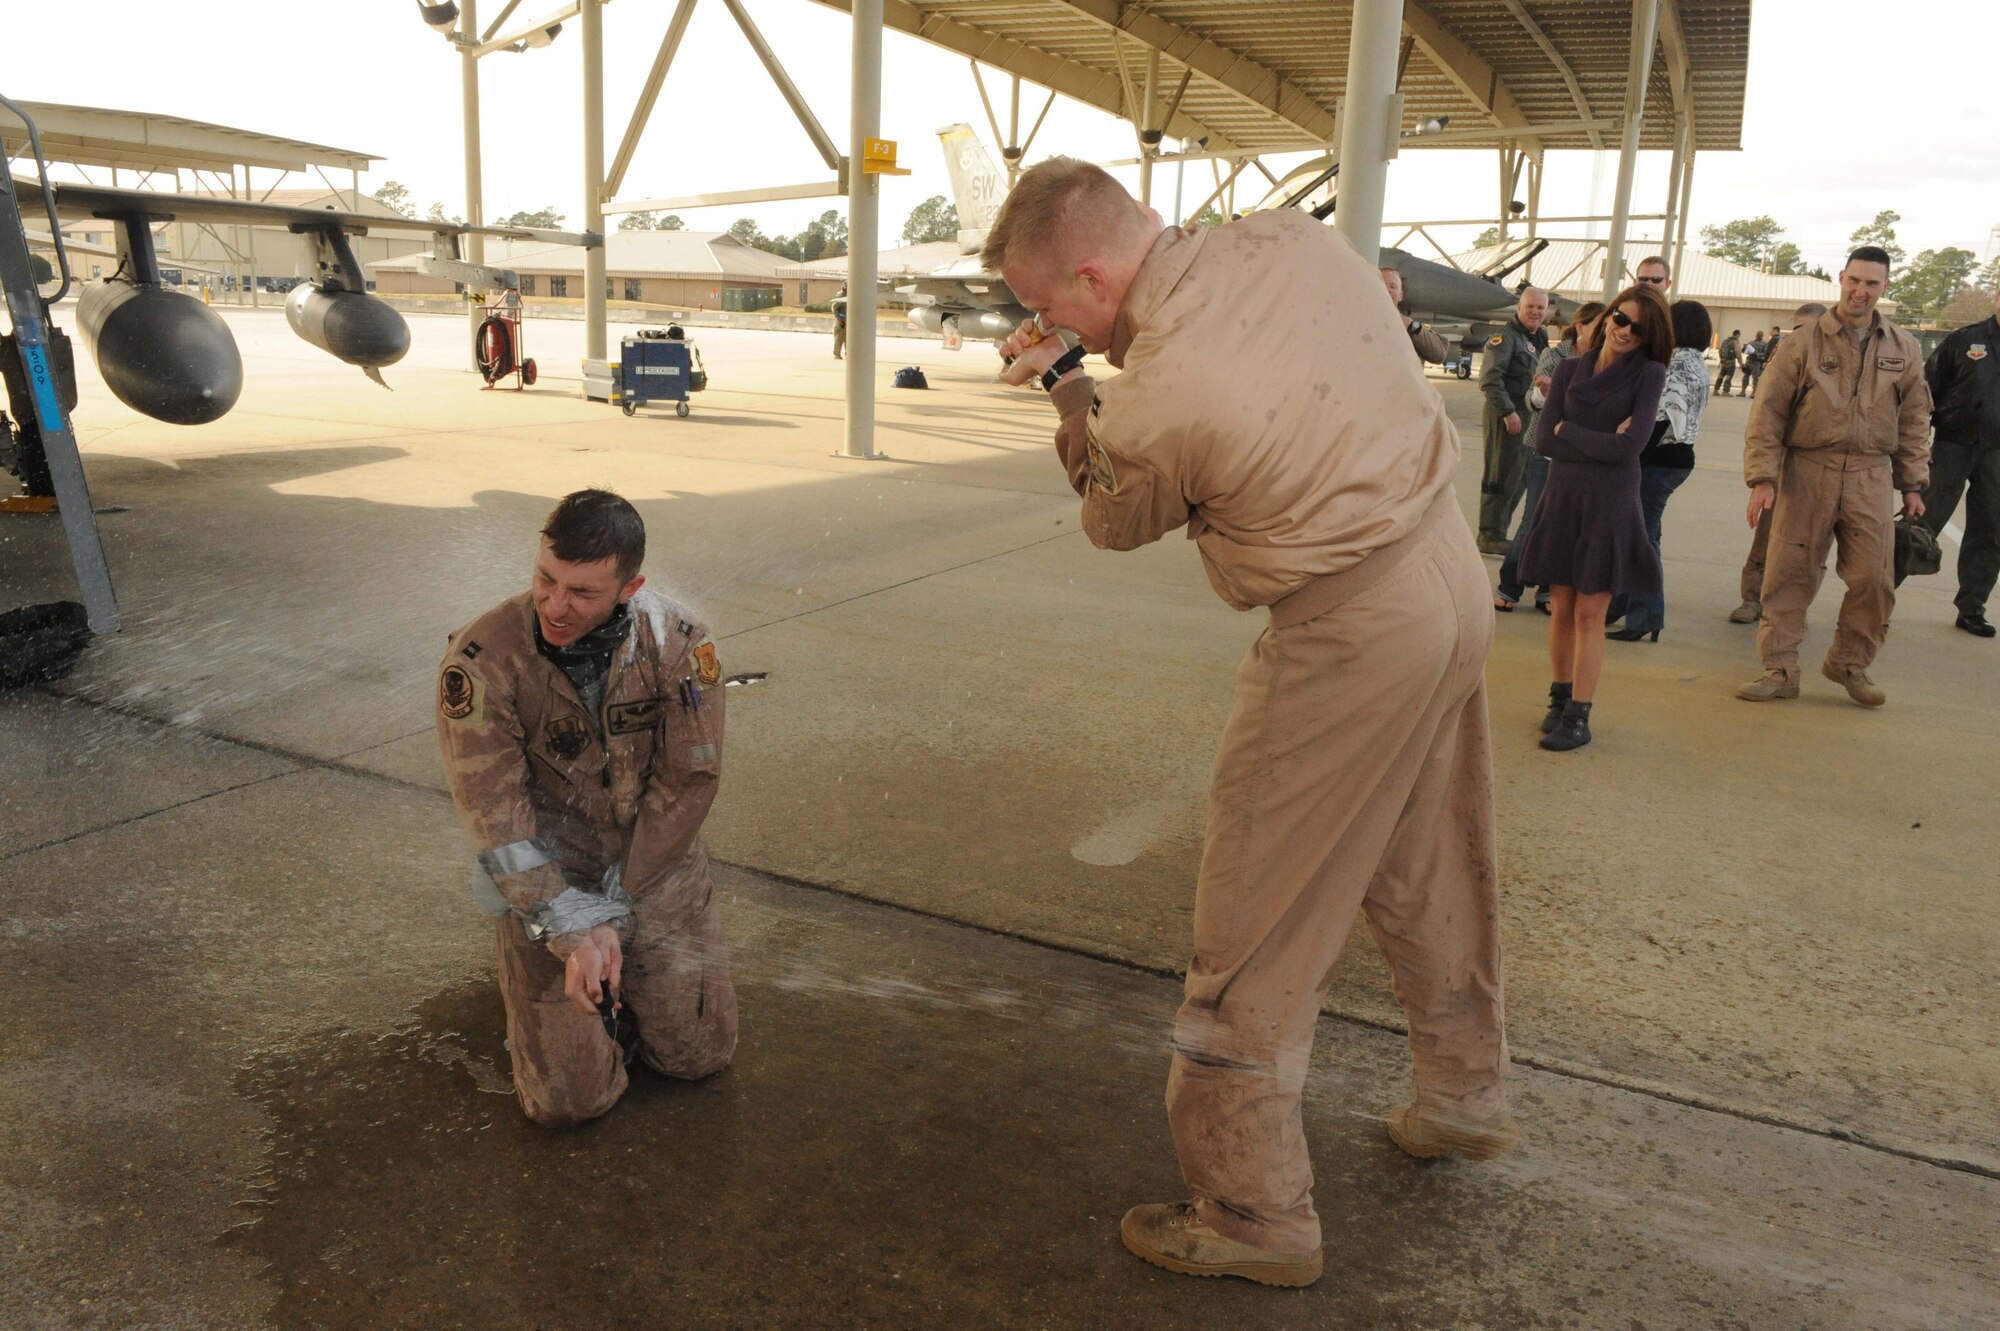 SHAW AIR FORCE BASE, S.C. -- Captain Jeff Shulman, 79th Fighter Squadron, is hosed down by Capt. Casey Manning, 79th FS, after his final, or "fini," flight home from Afghanistan Jan. 23. (U.S. Air Force Photo/Senior Airman David Minor)